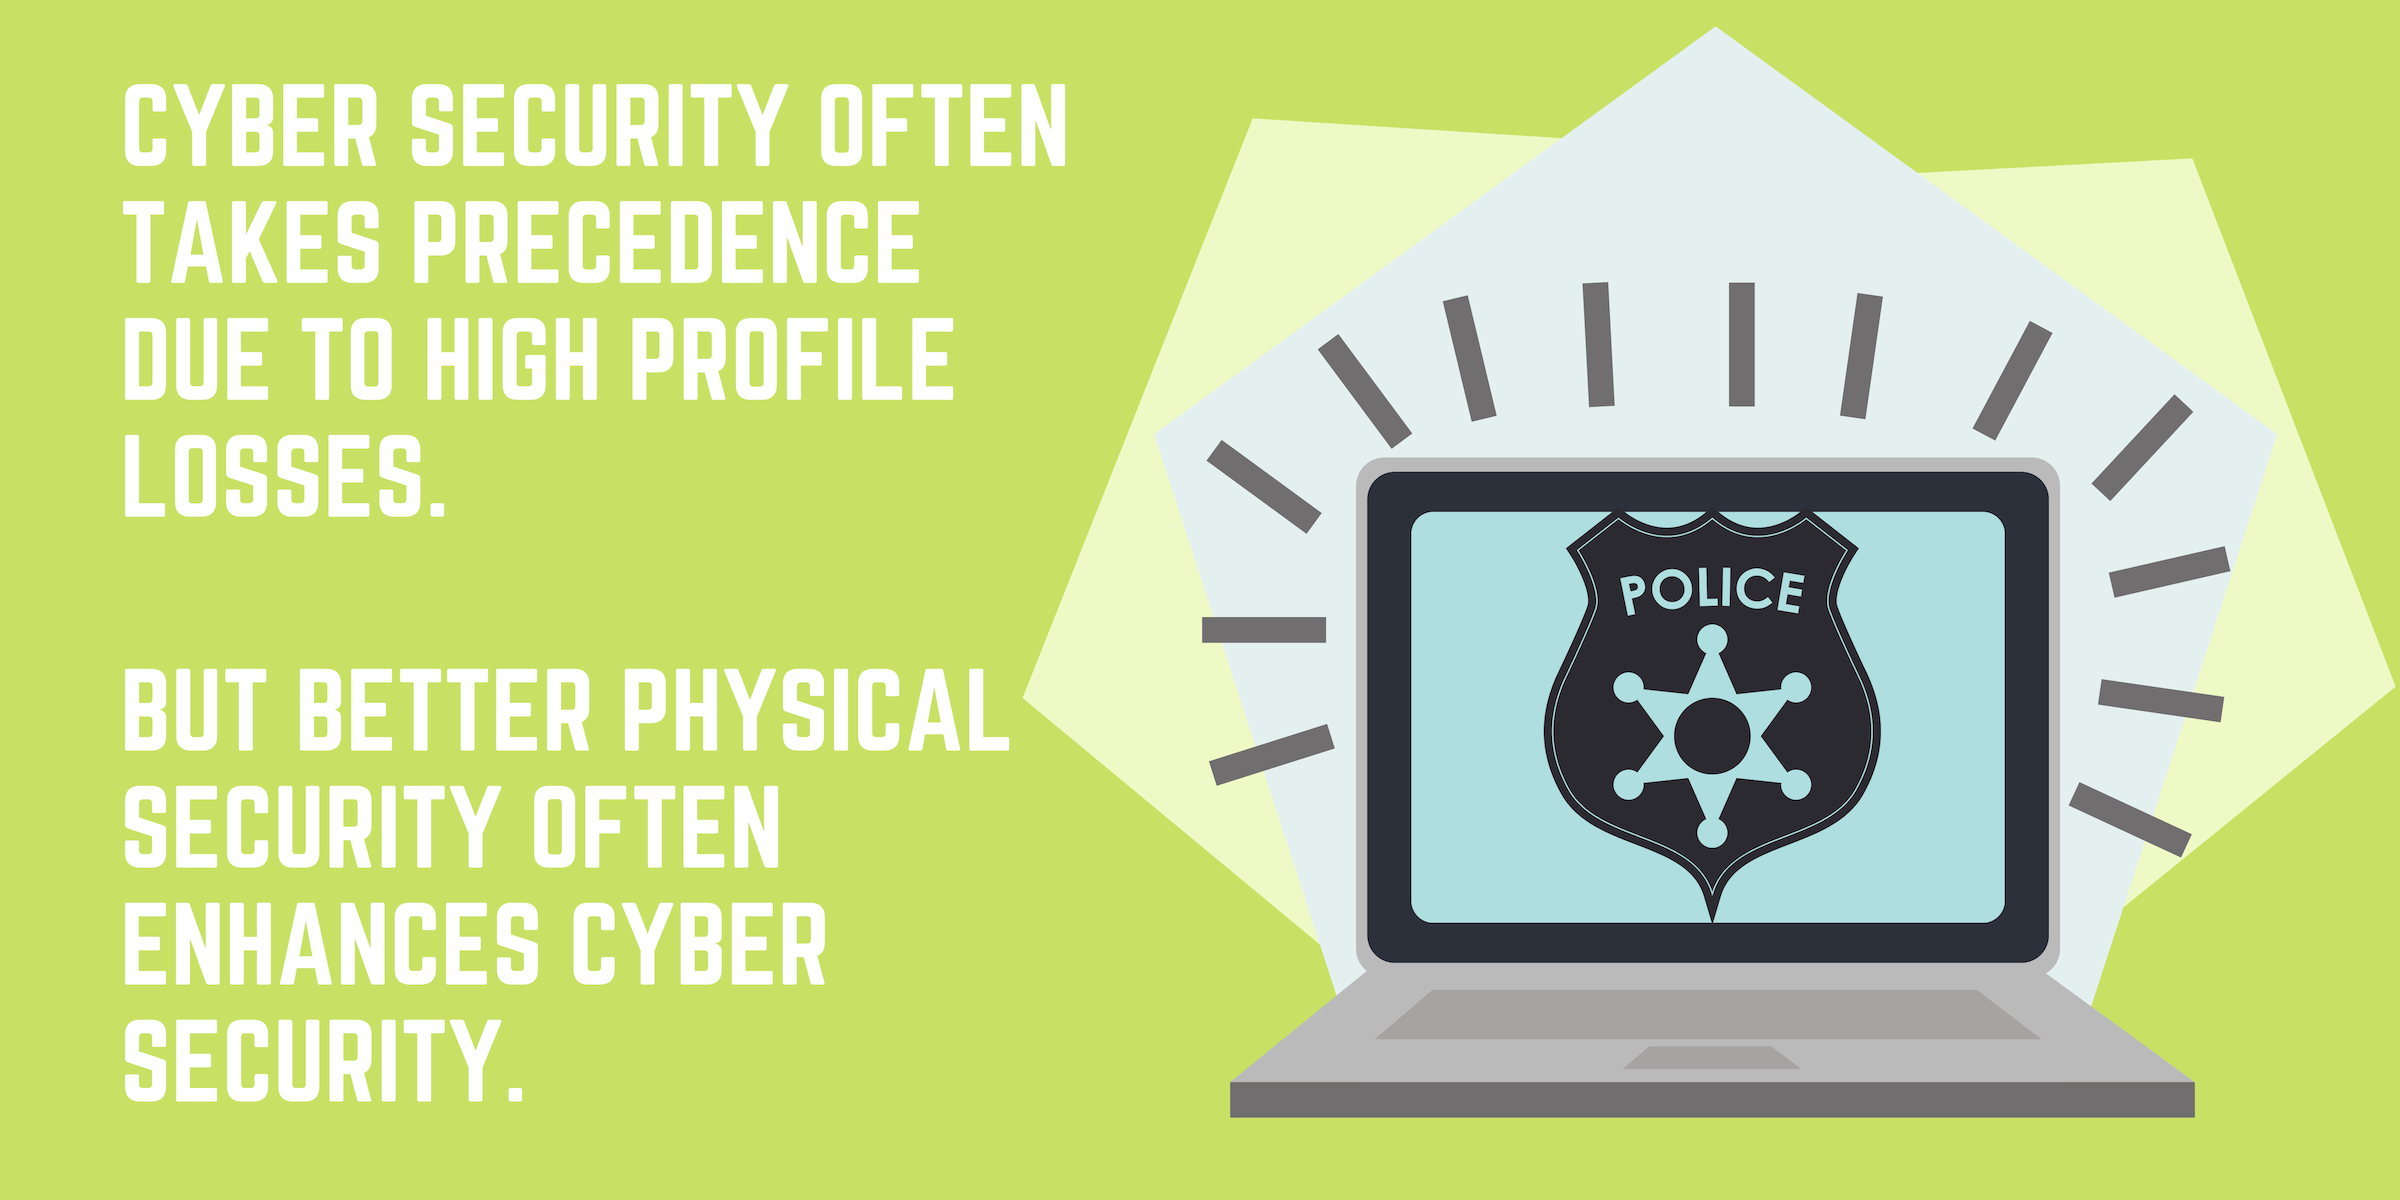 Cyber security often takes precedence due to high profile losses. But better physical security often enhances cyber security.